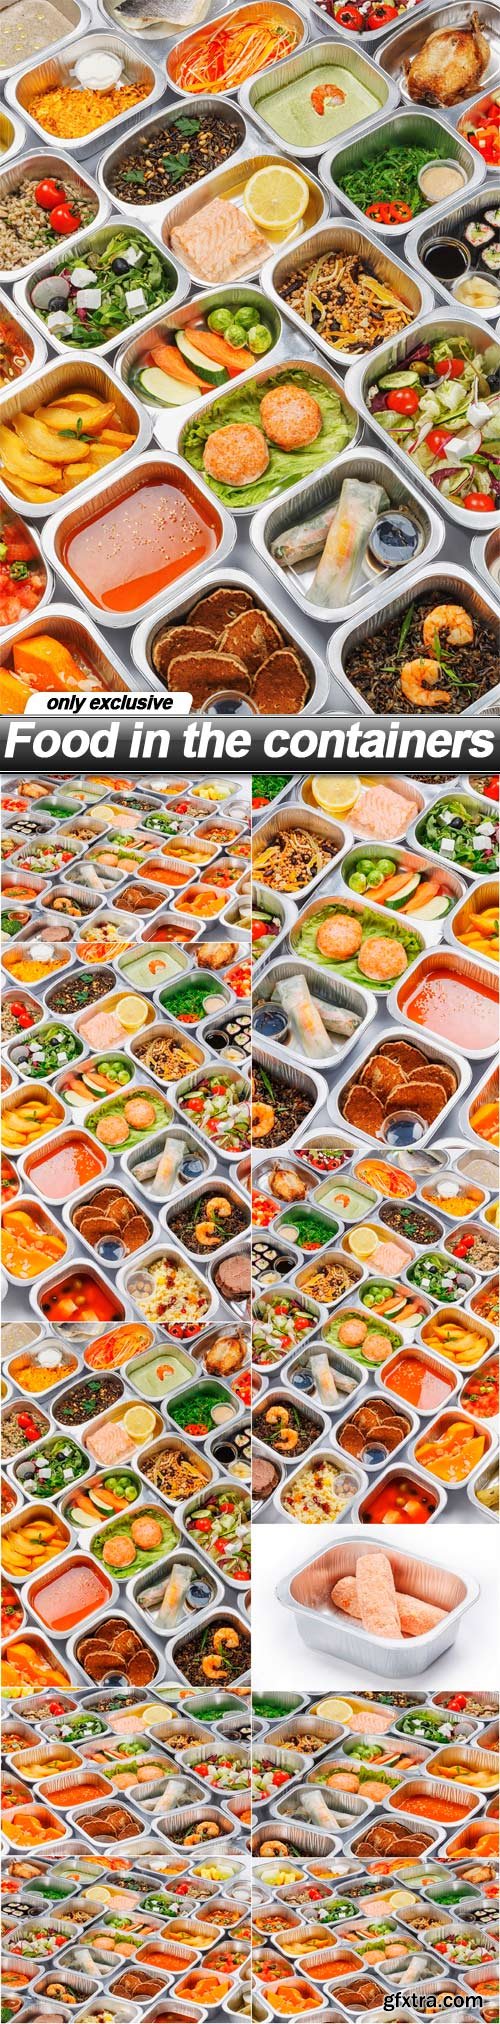 Food in the containers - 10 UHQ JPEG